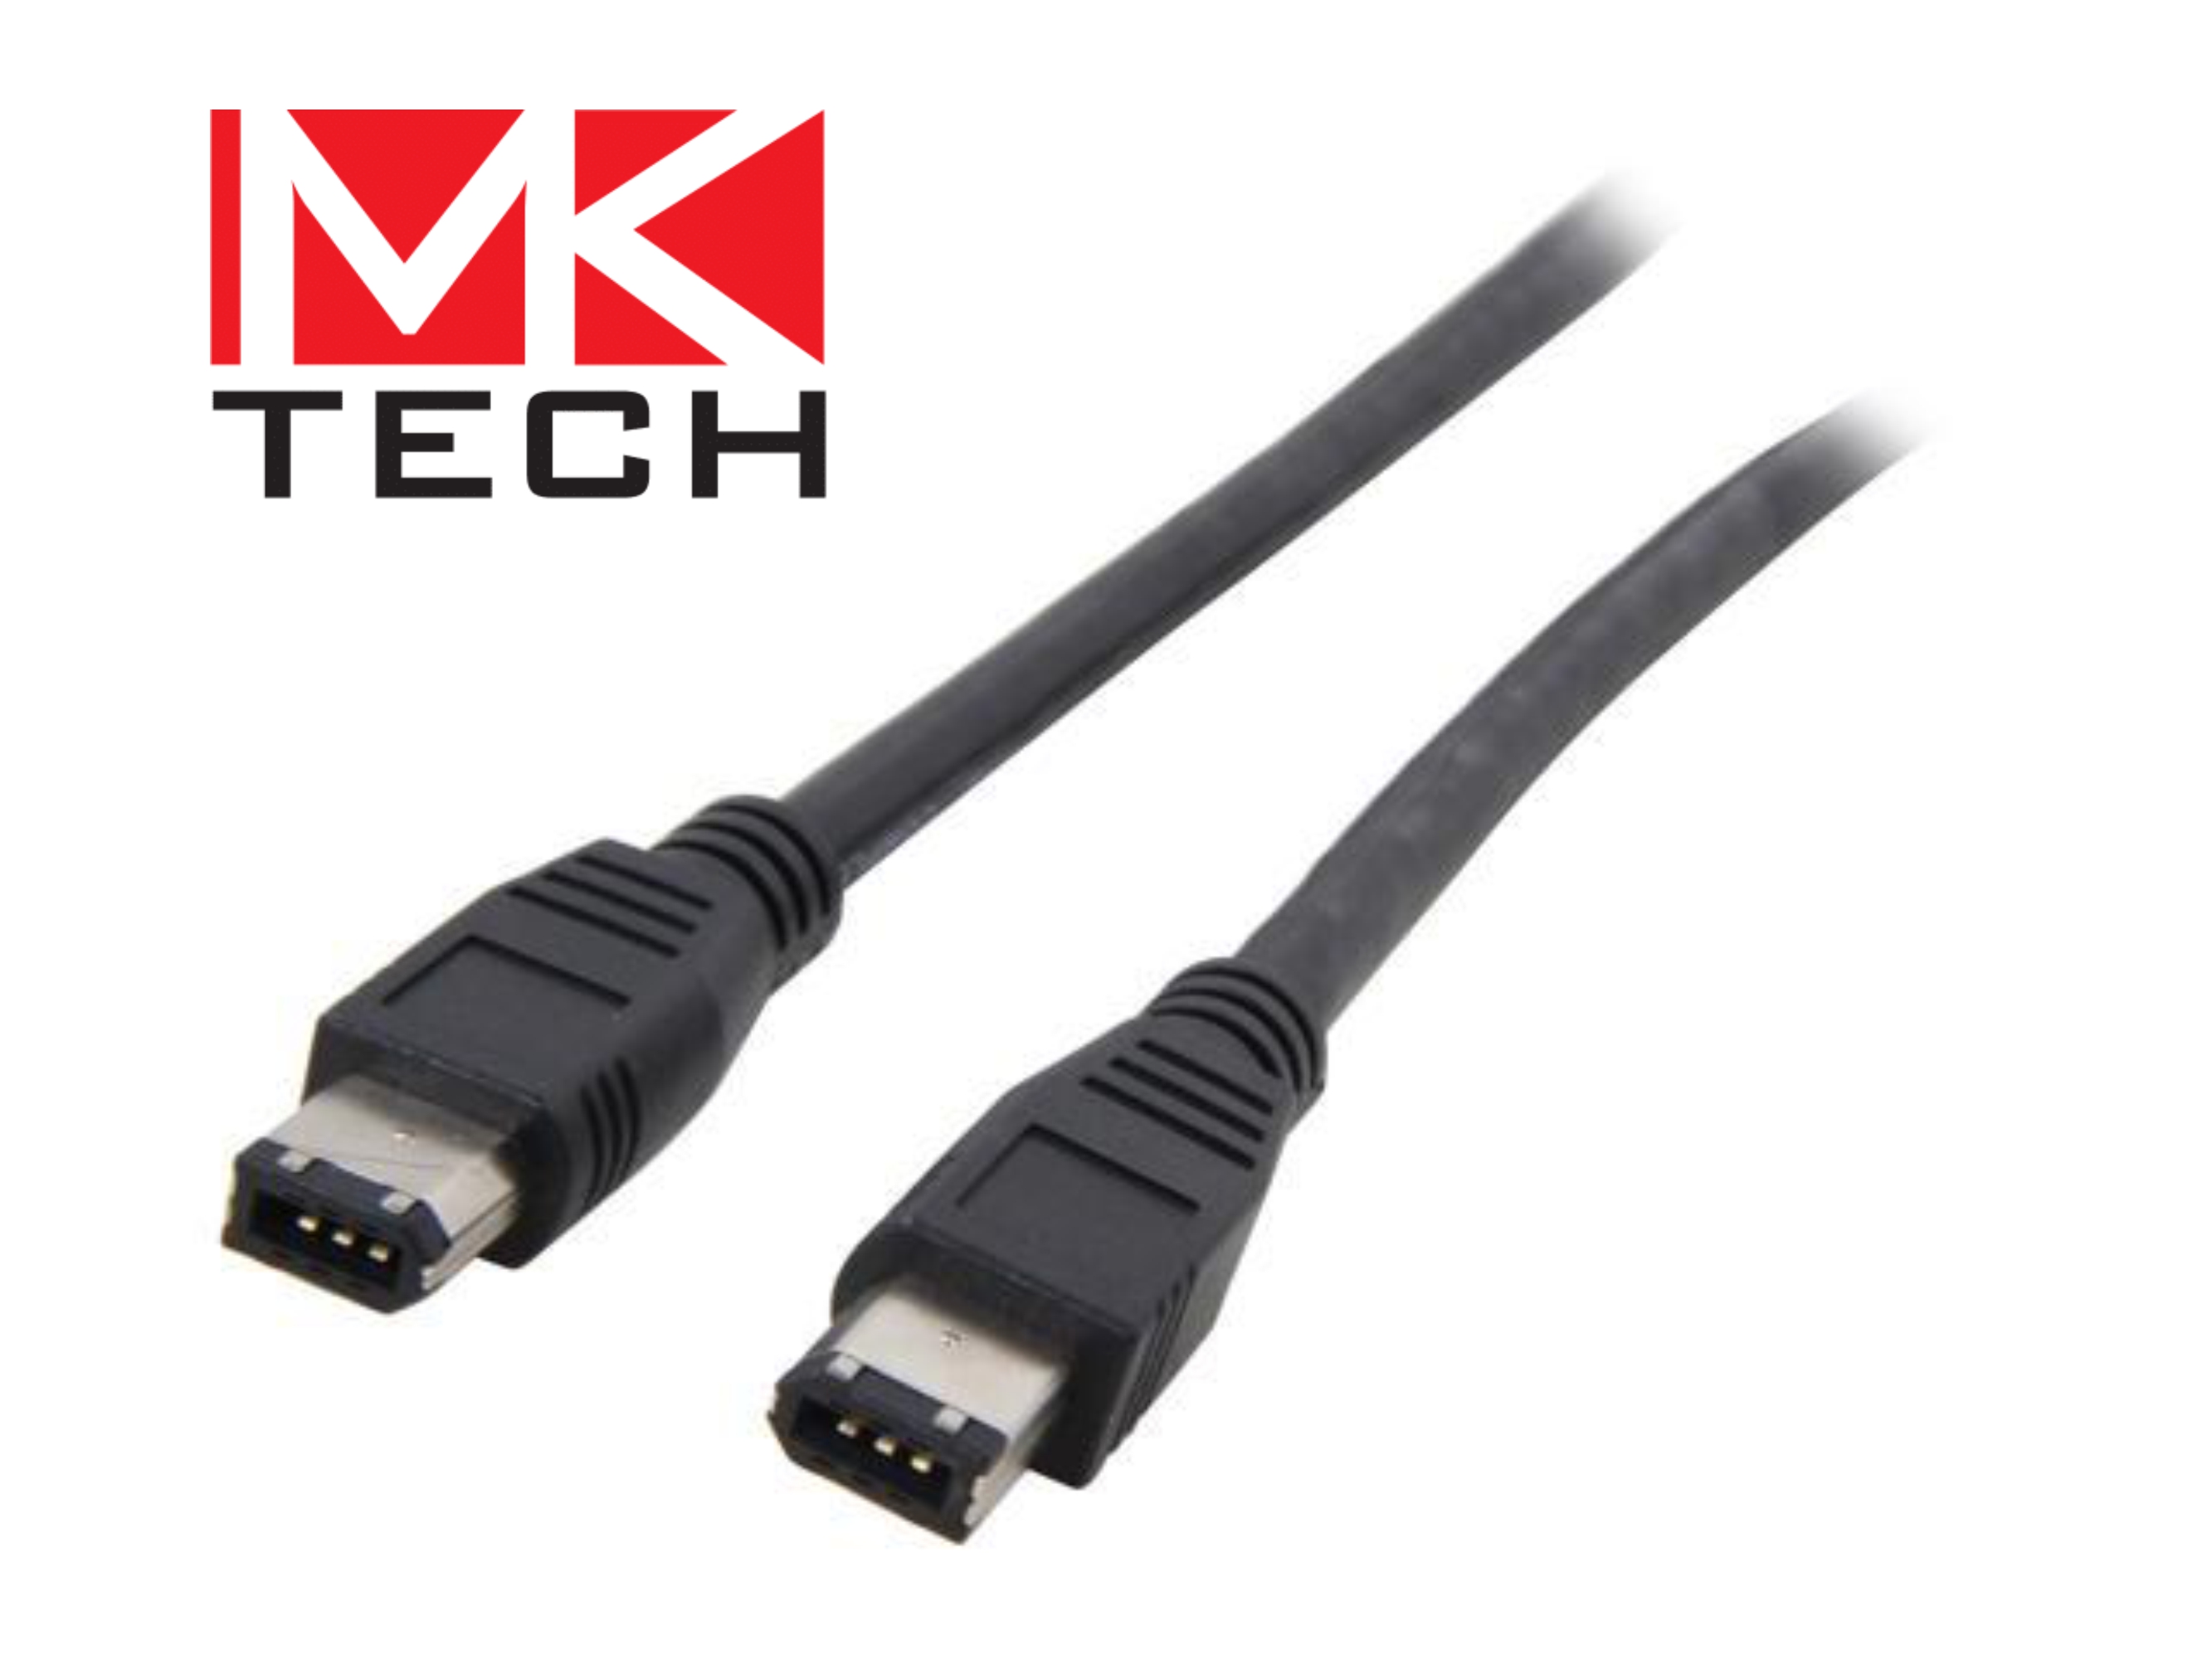 MKTECH IEEE-1394 cable, type 6/6, 1.8m